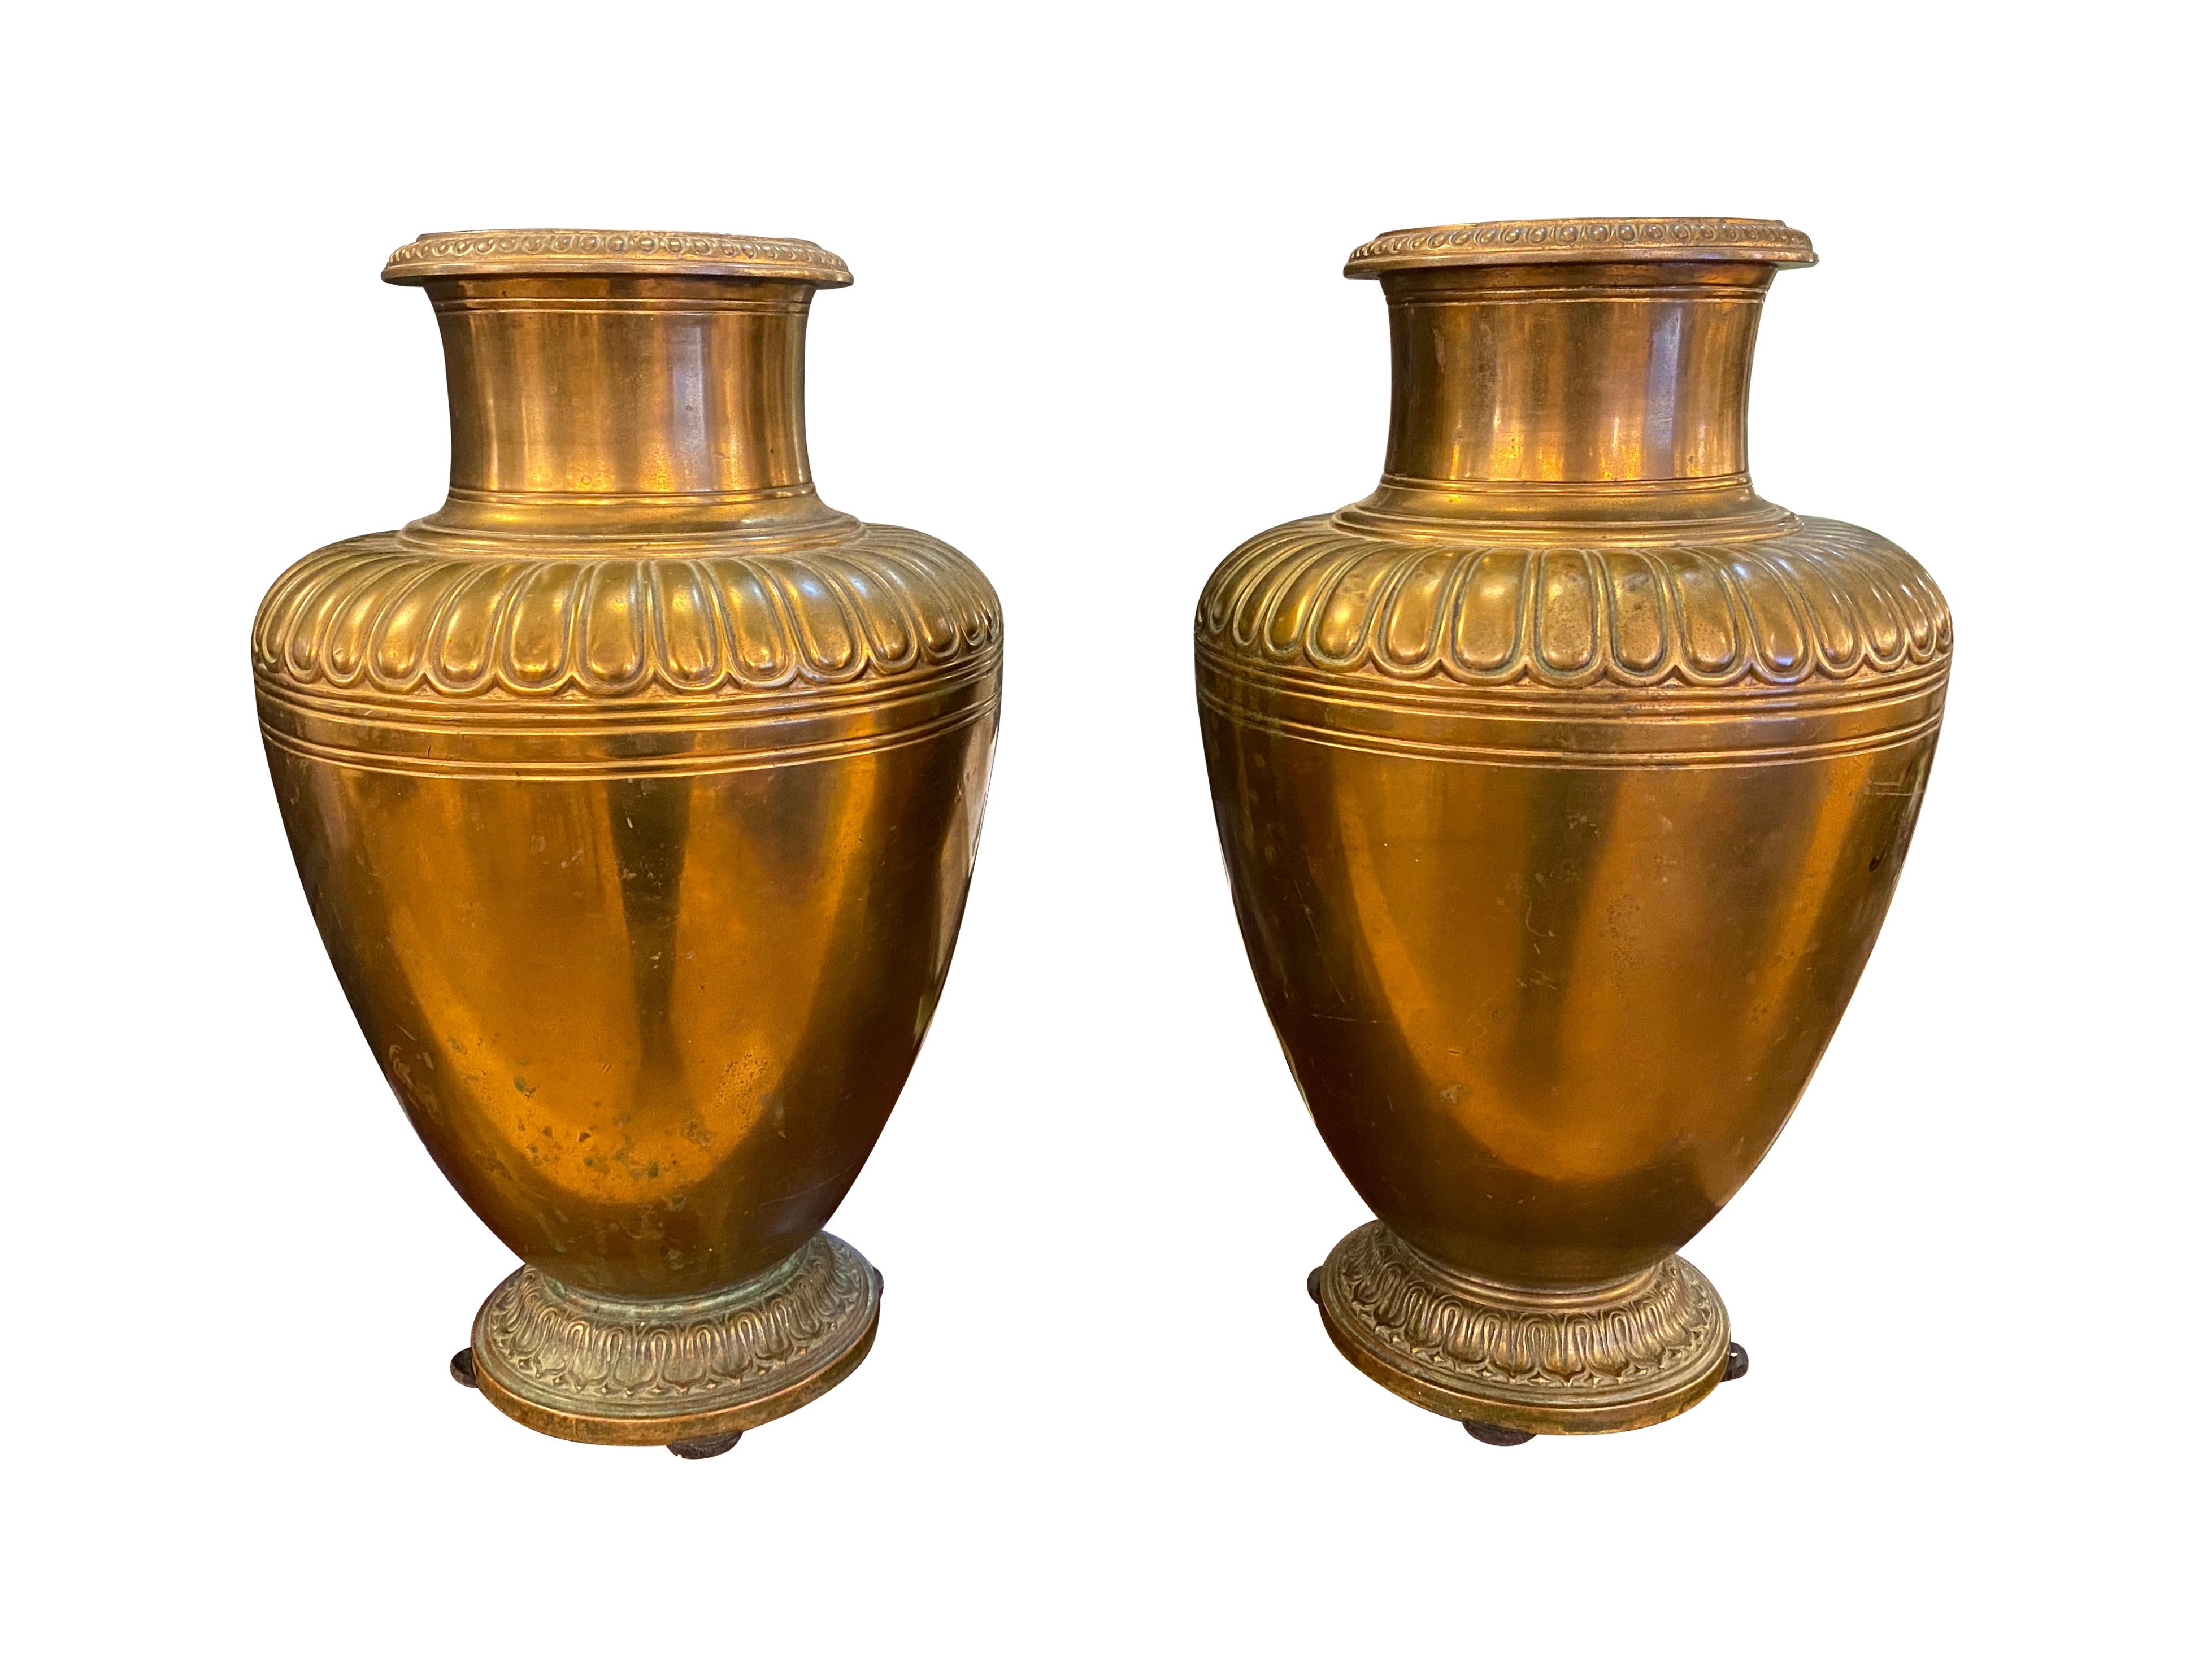 Tiffany bronze urns with simple egg and dart detailing from the 20th century. This can be seen at our 2420 Broadway location on the upper west side in Manhattan.